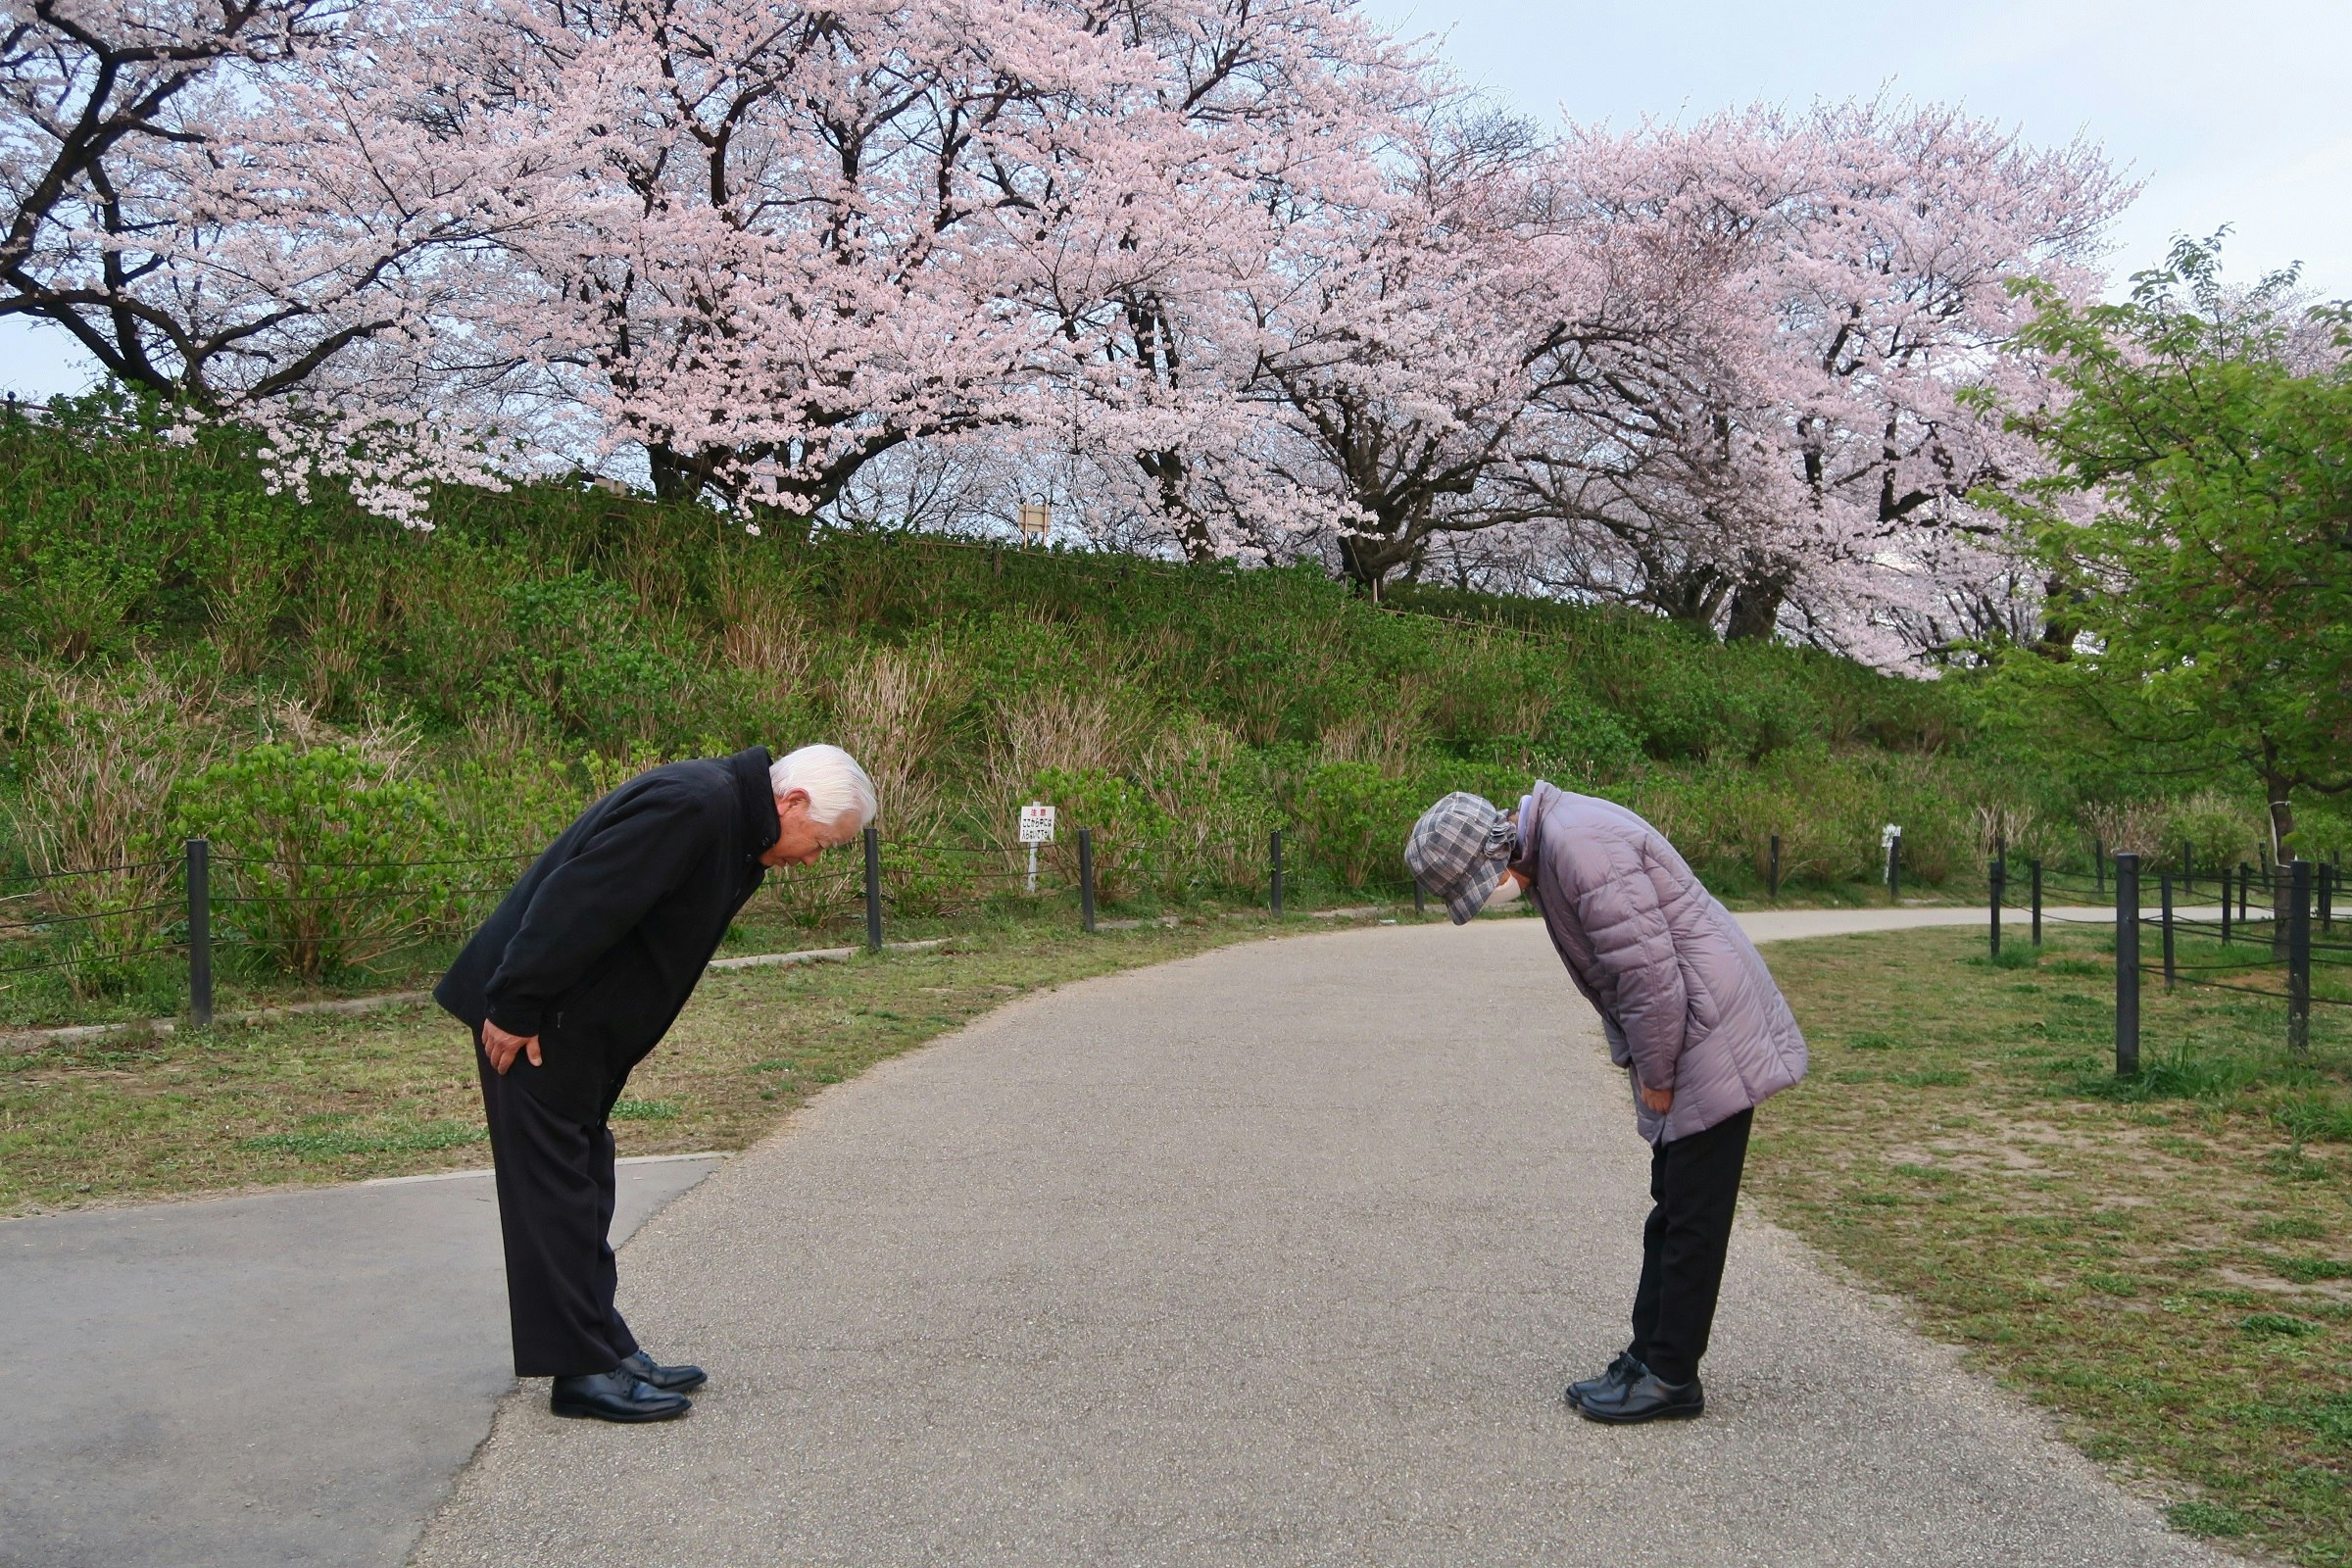 Two people bowing to each other on a path under cherry blossoms in Japan